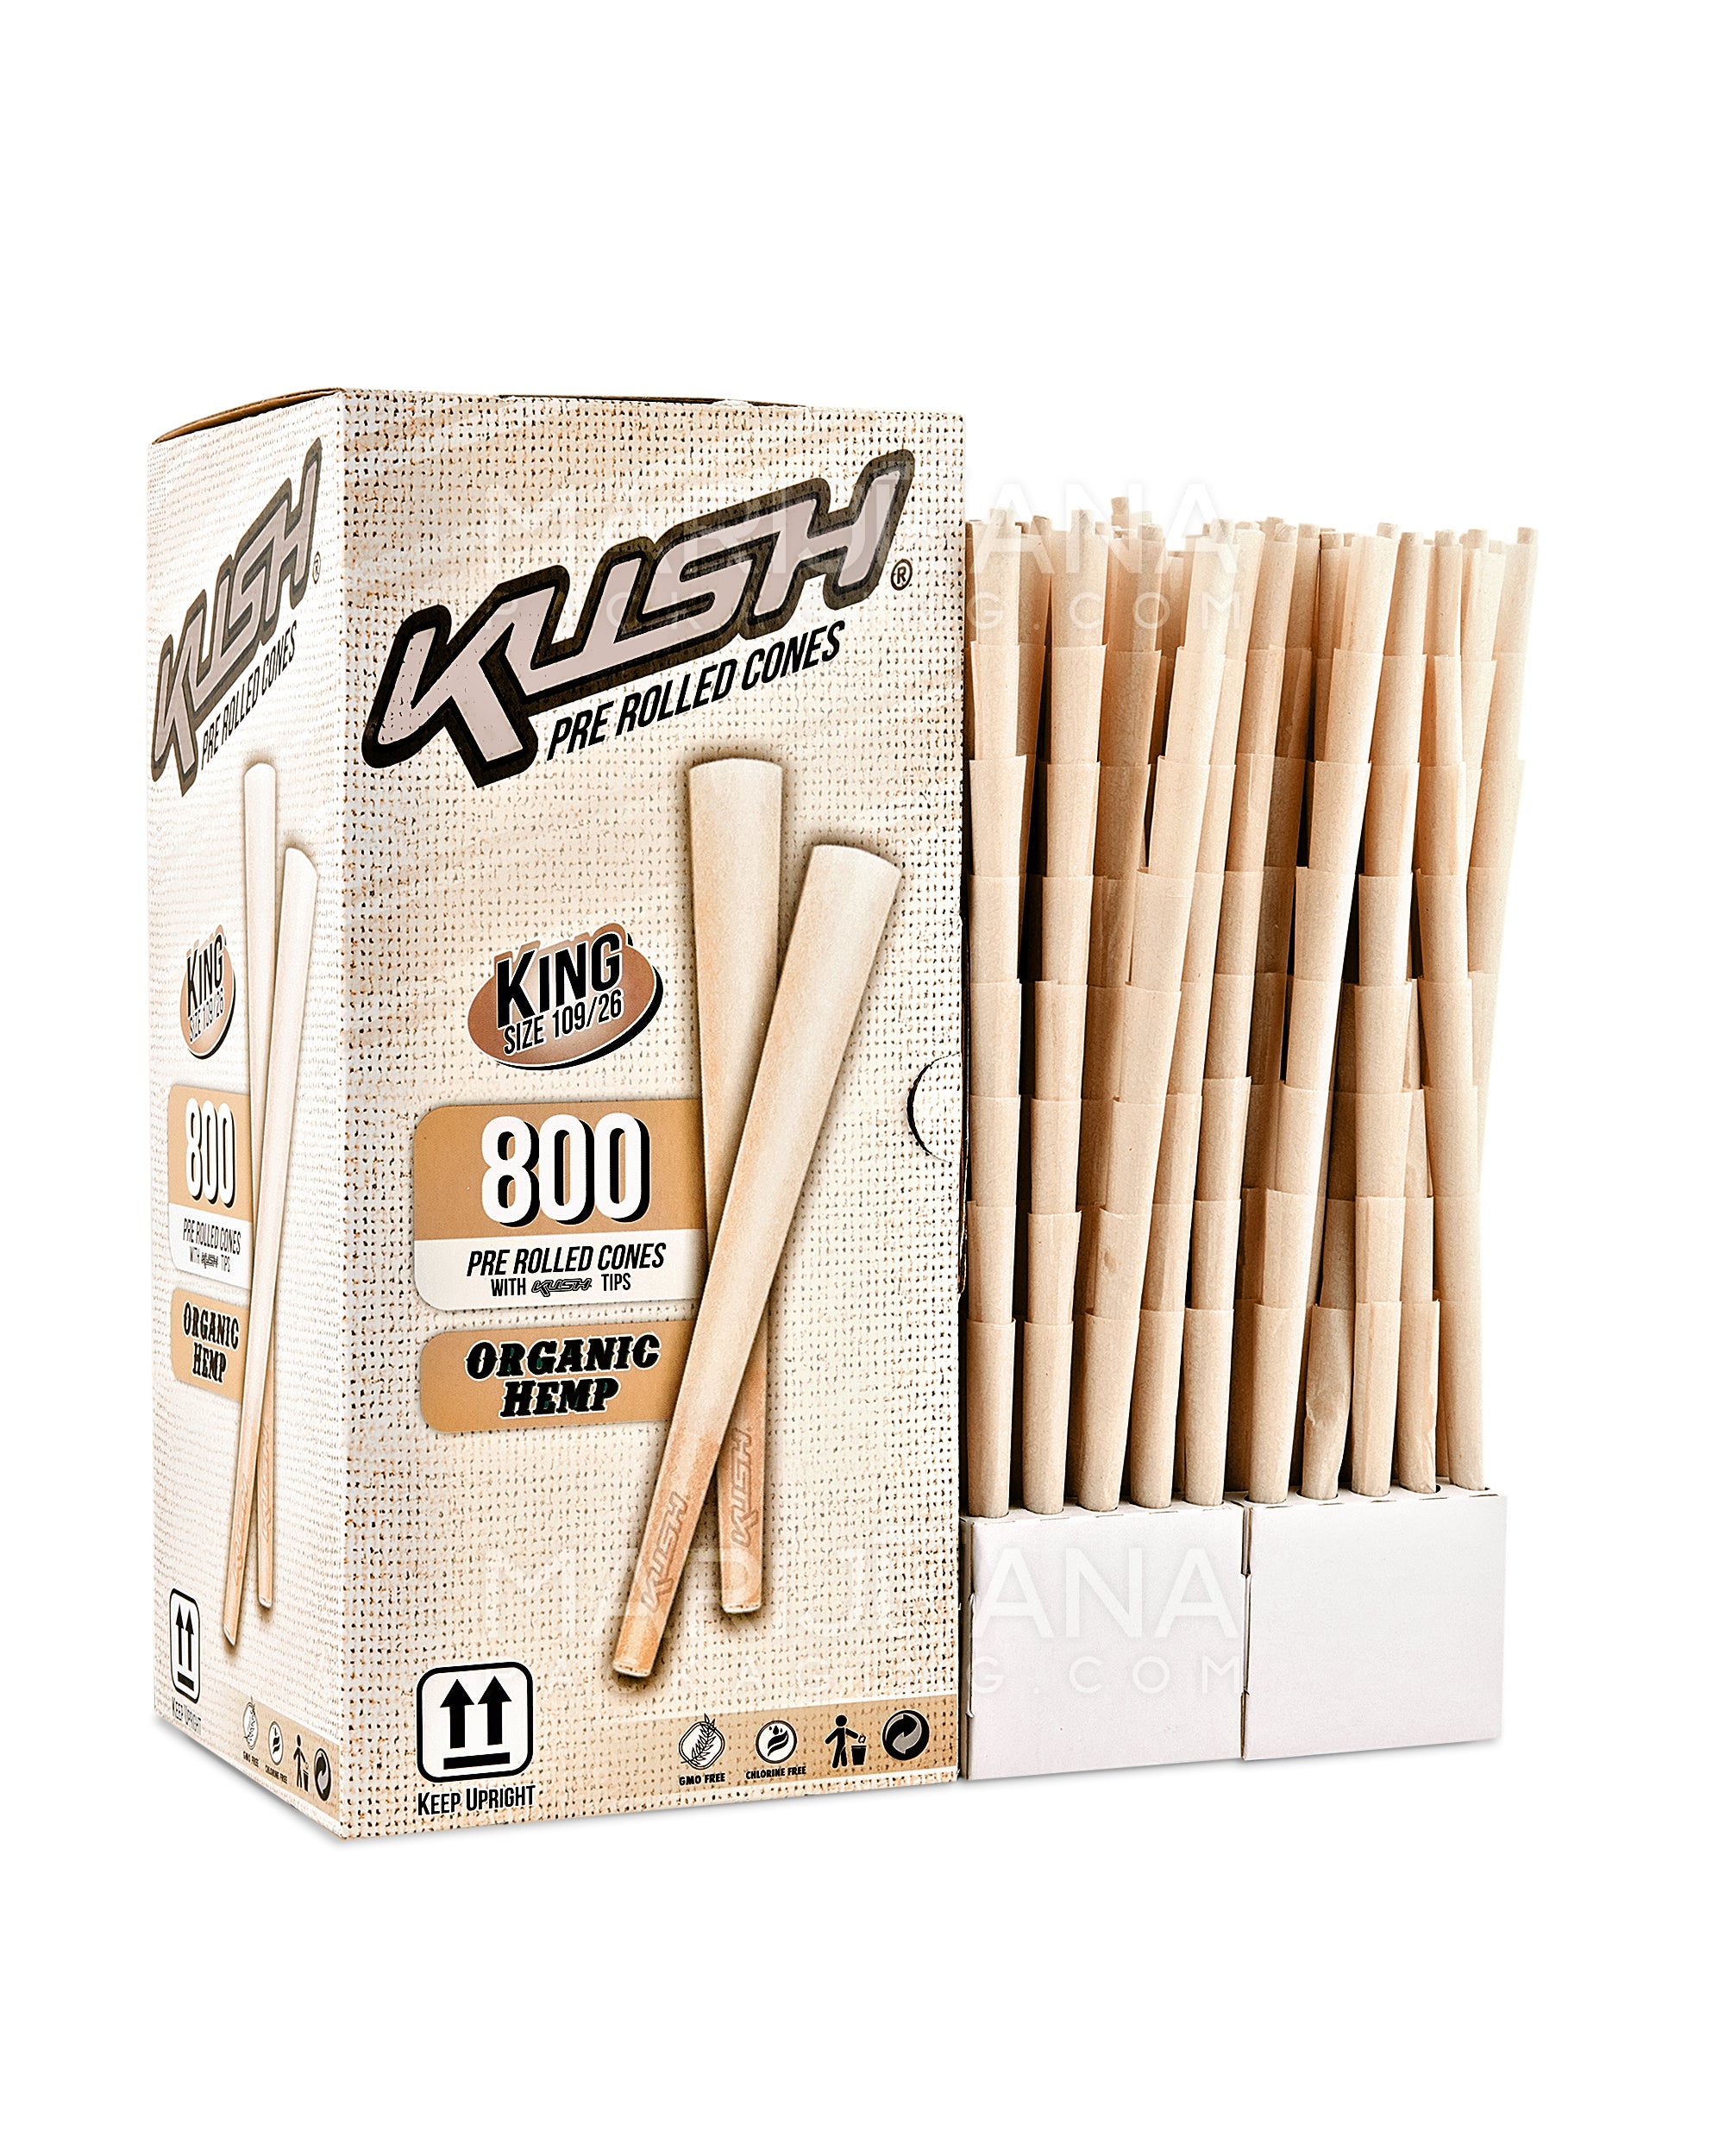 KUSH | Organic King Size Pre-Rolled Cones w/ Filter Tip | 109mm - Organic Hemp Paper - 800 Count